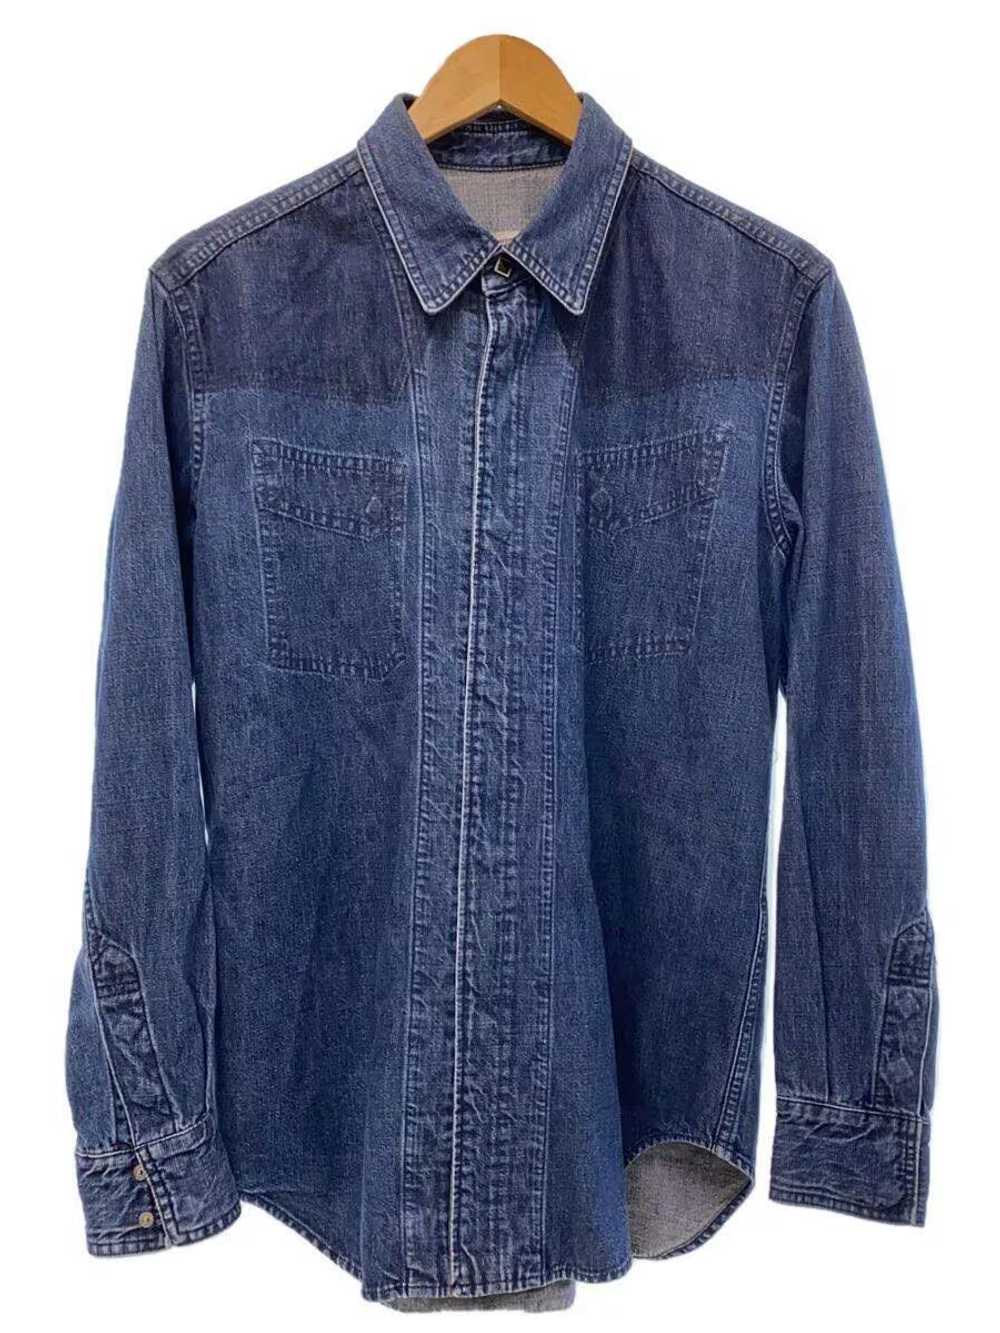 Undercover SS99 "Relief" DDenim Shirt - image 1